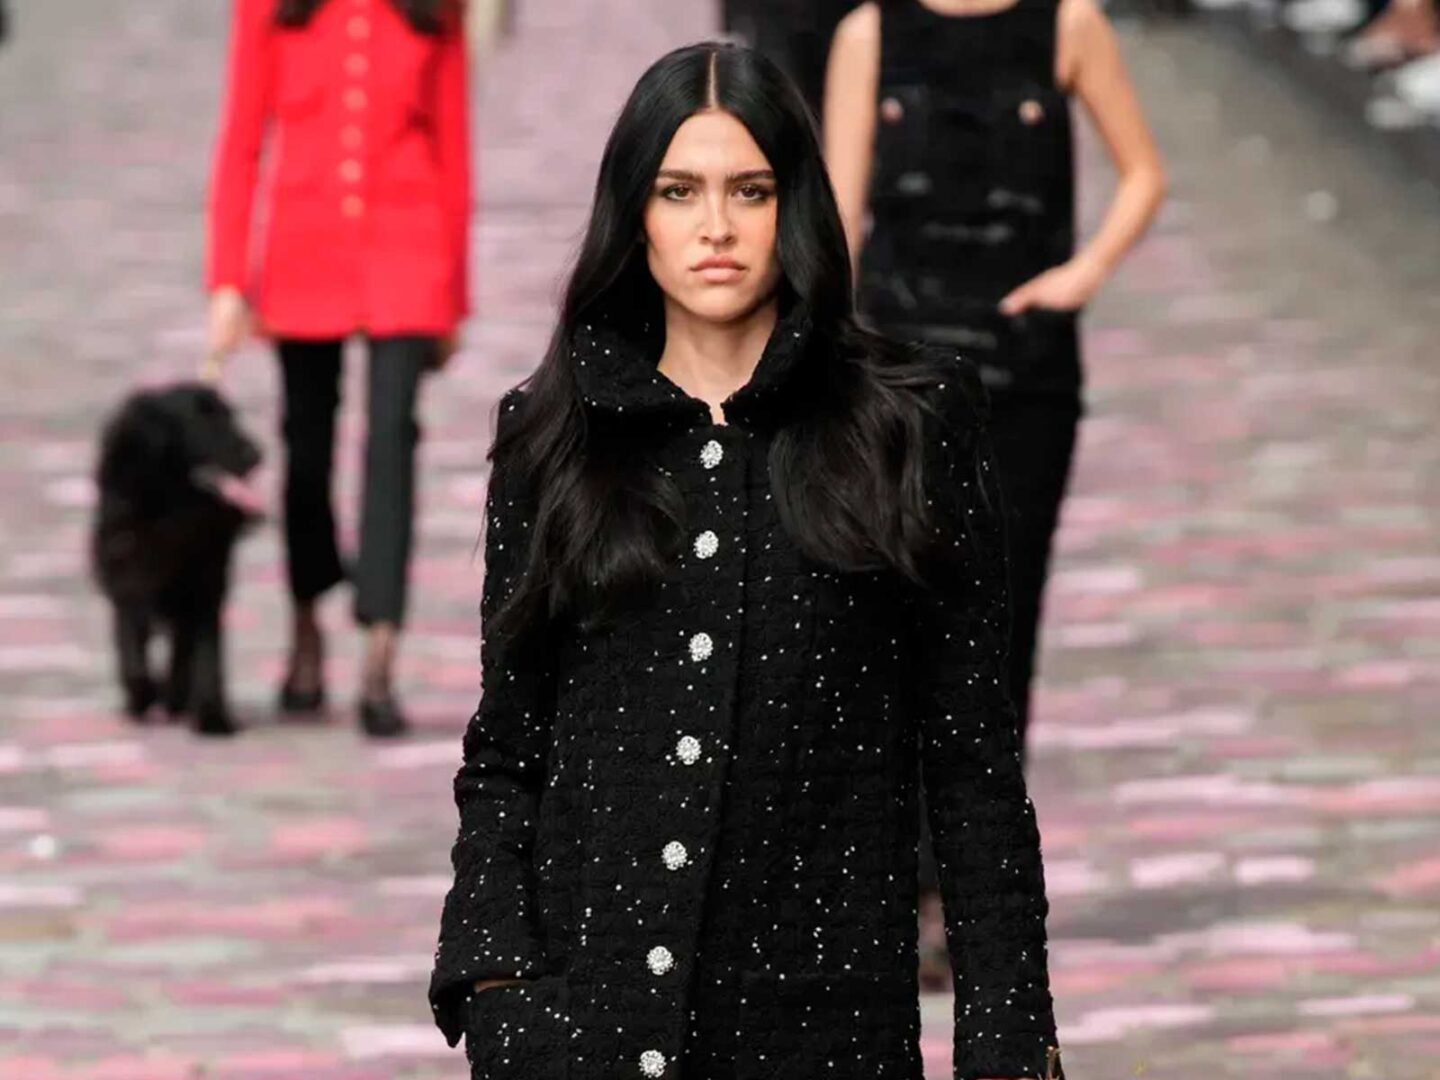 Chanel once again redefines the boundaries of haute couture